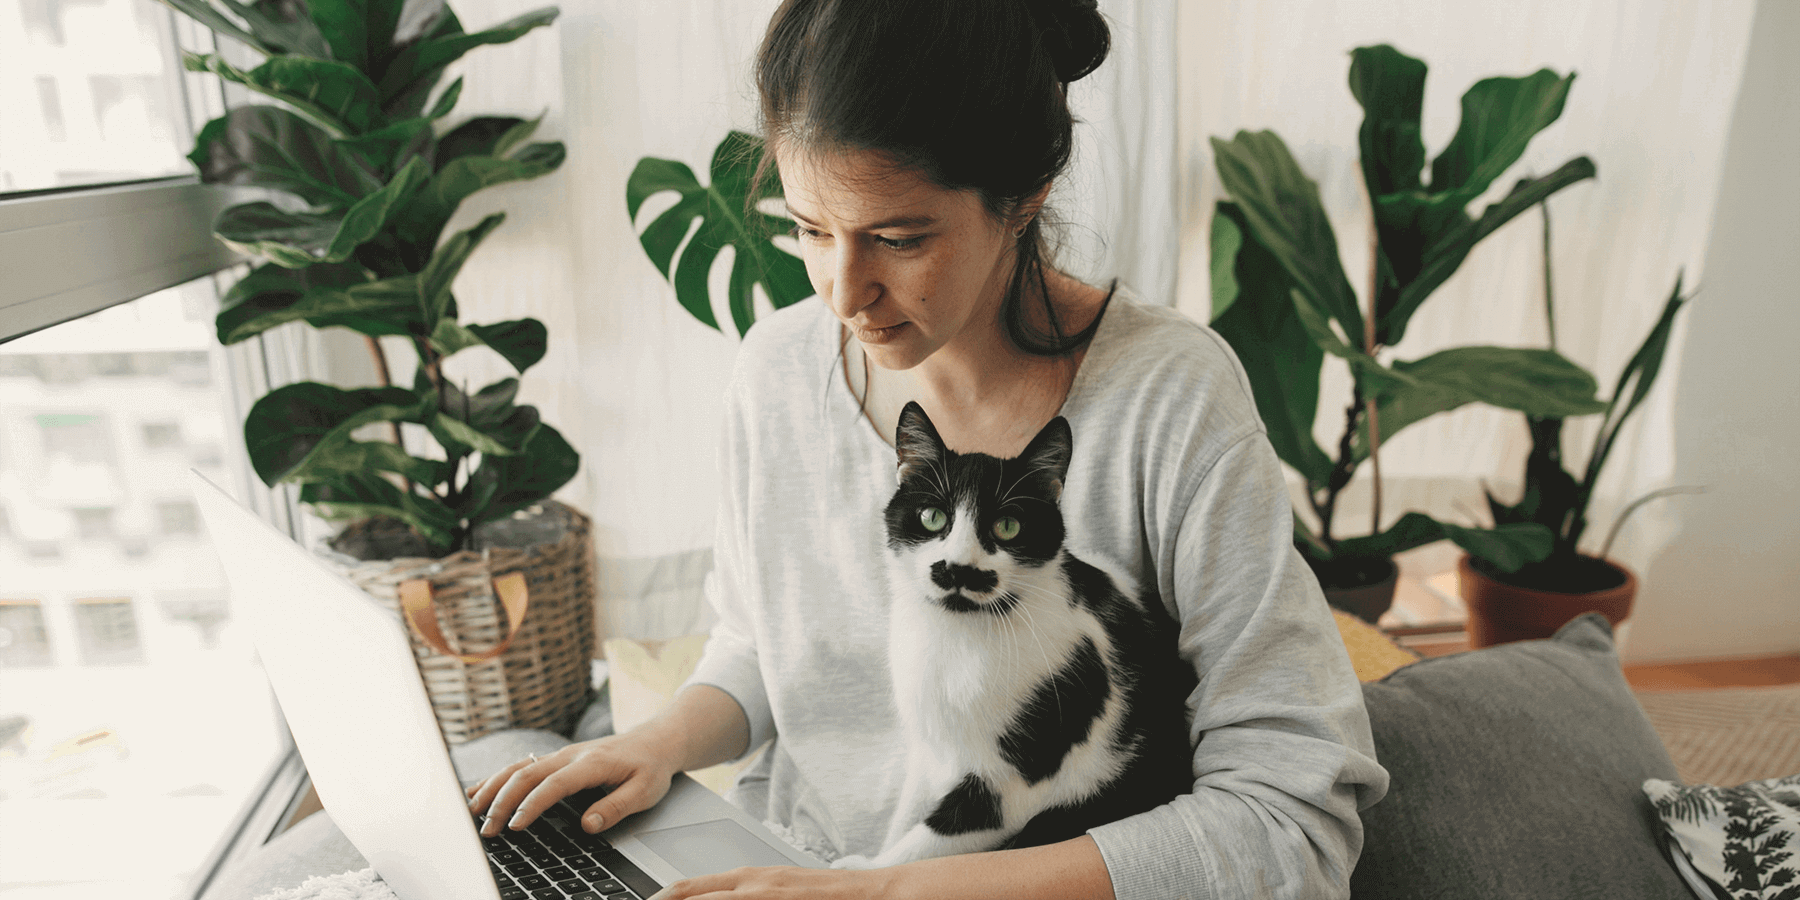 Woman with cat using laptop to research what luteinizing hormone is